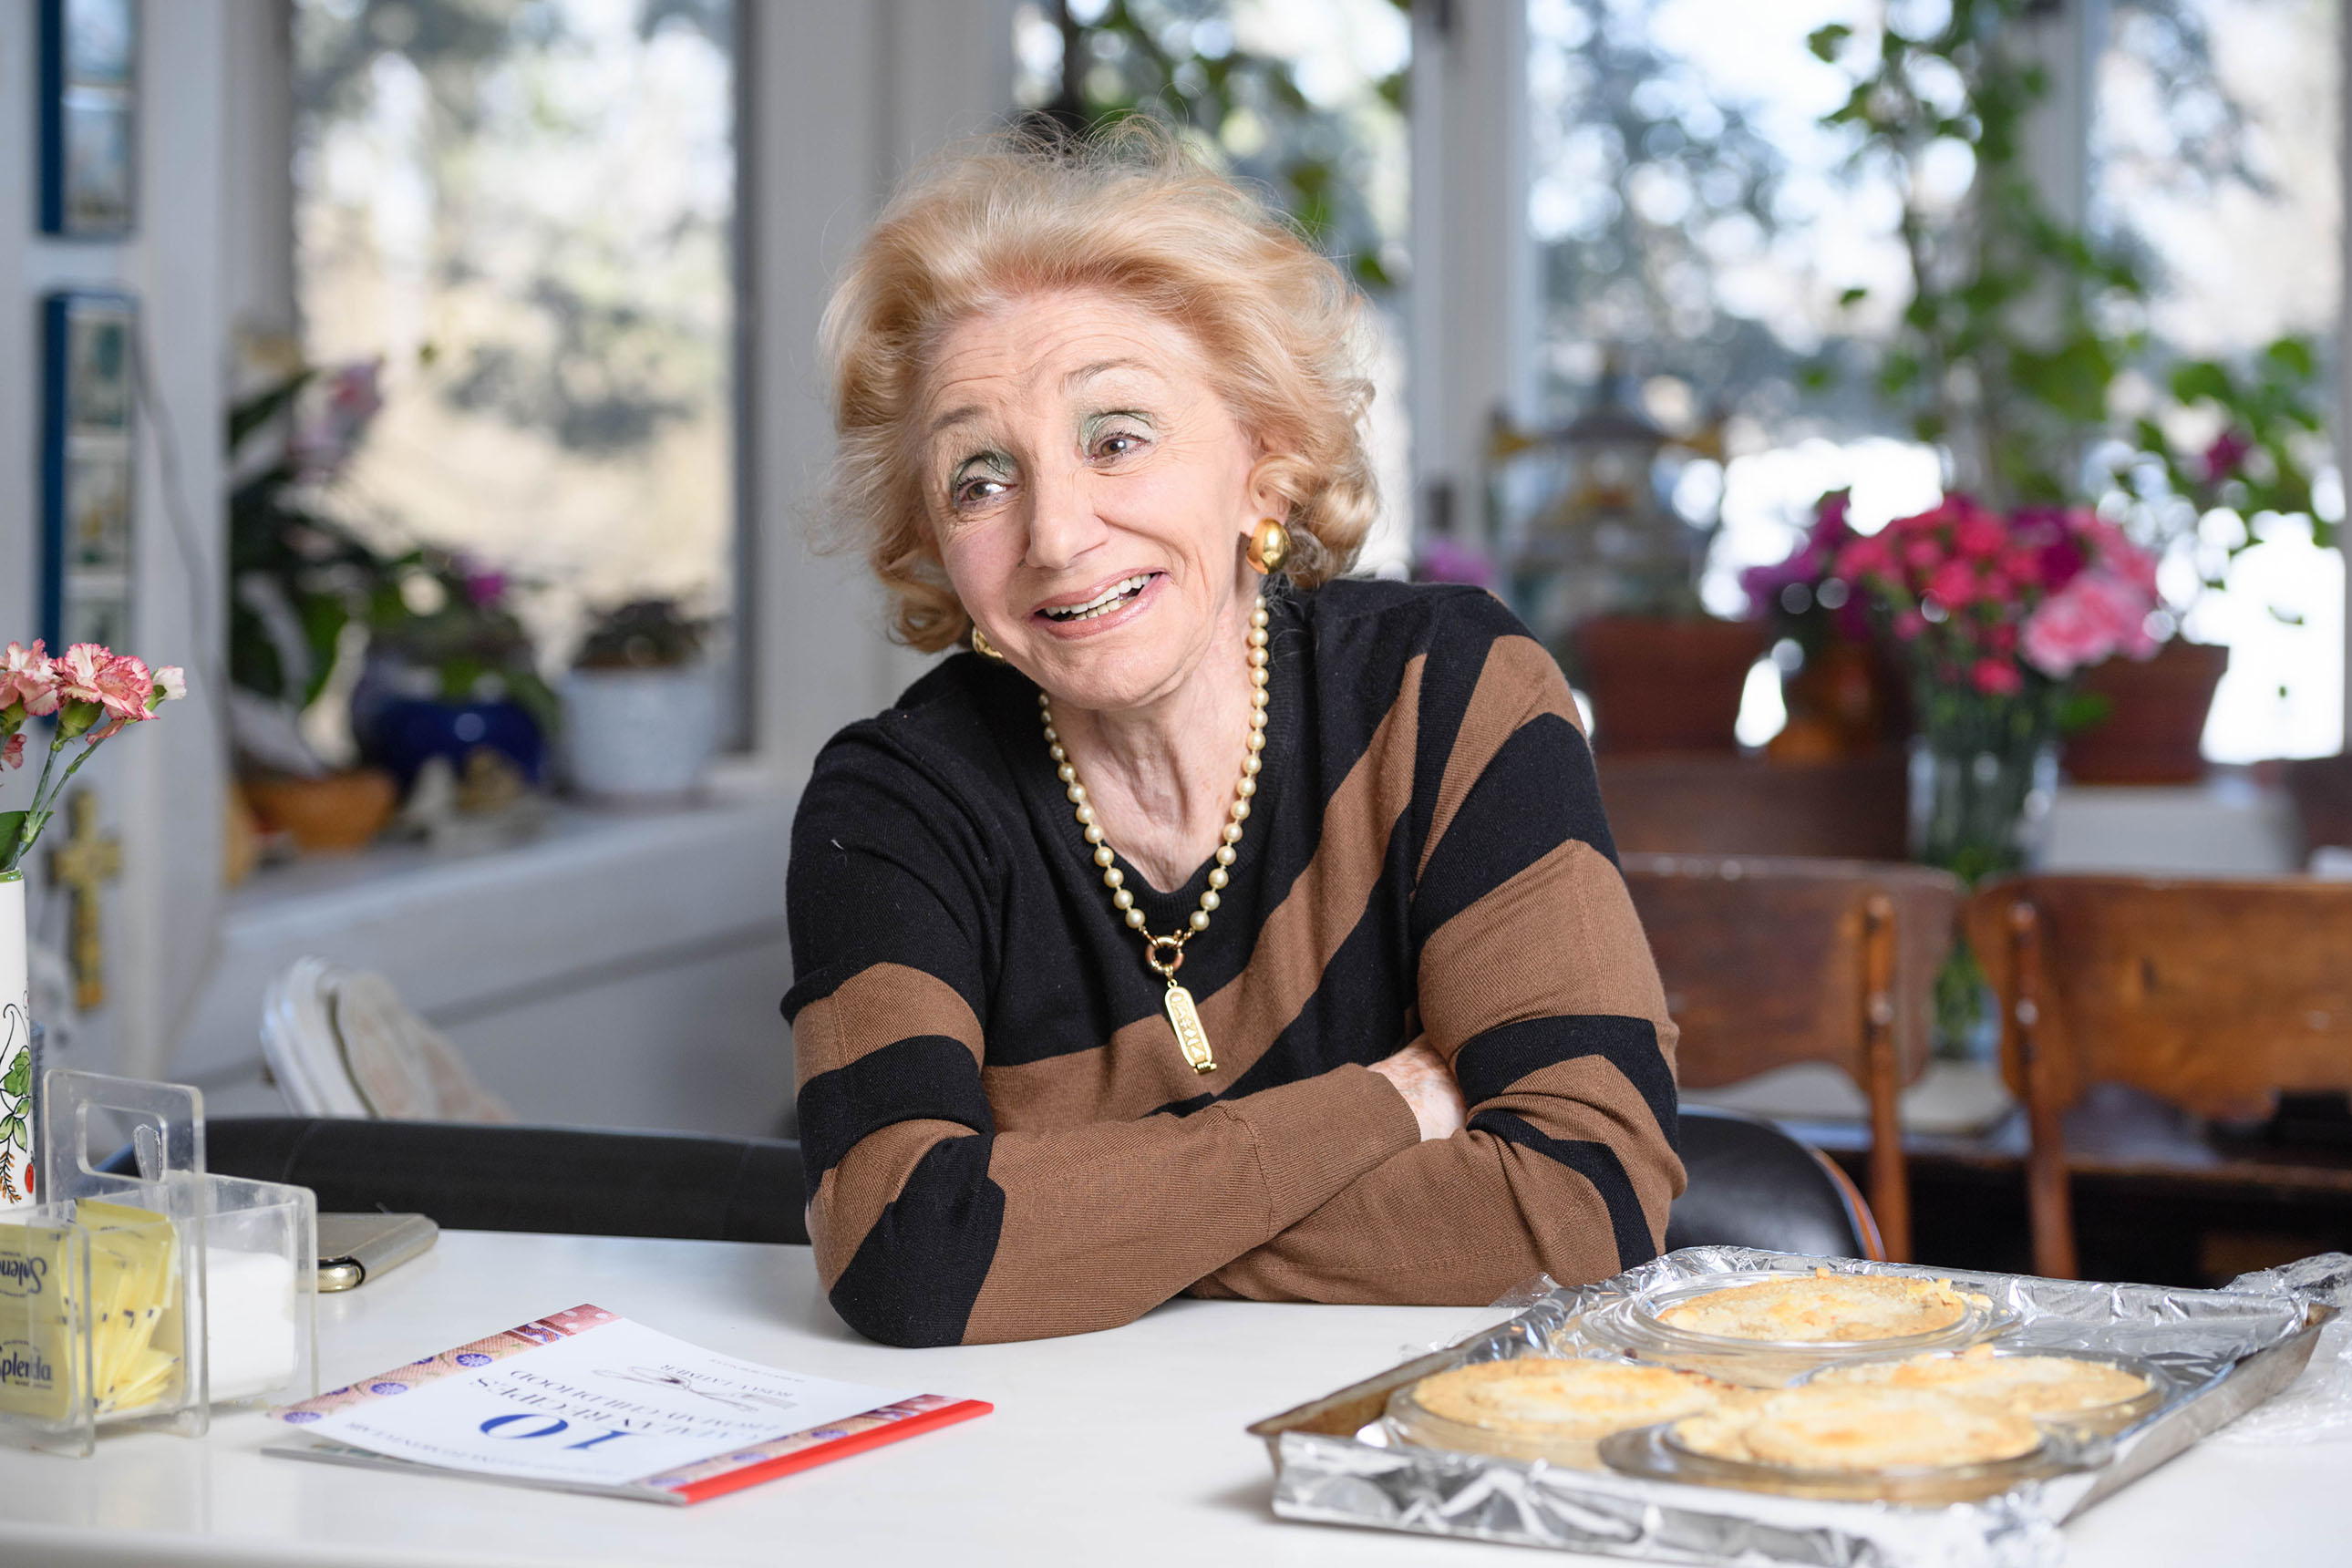 Friends and neighbors: Rosa V. Latimer, painter, chef, collector